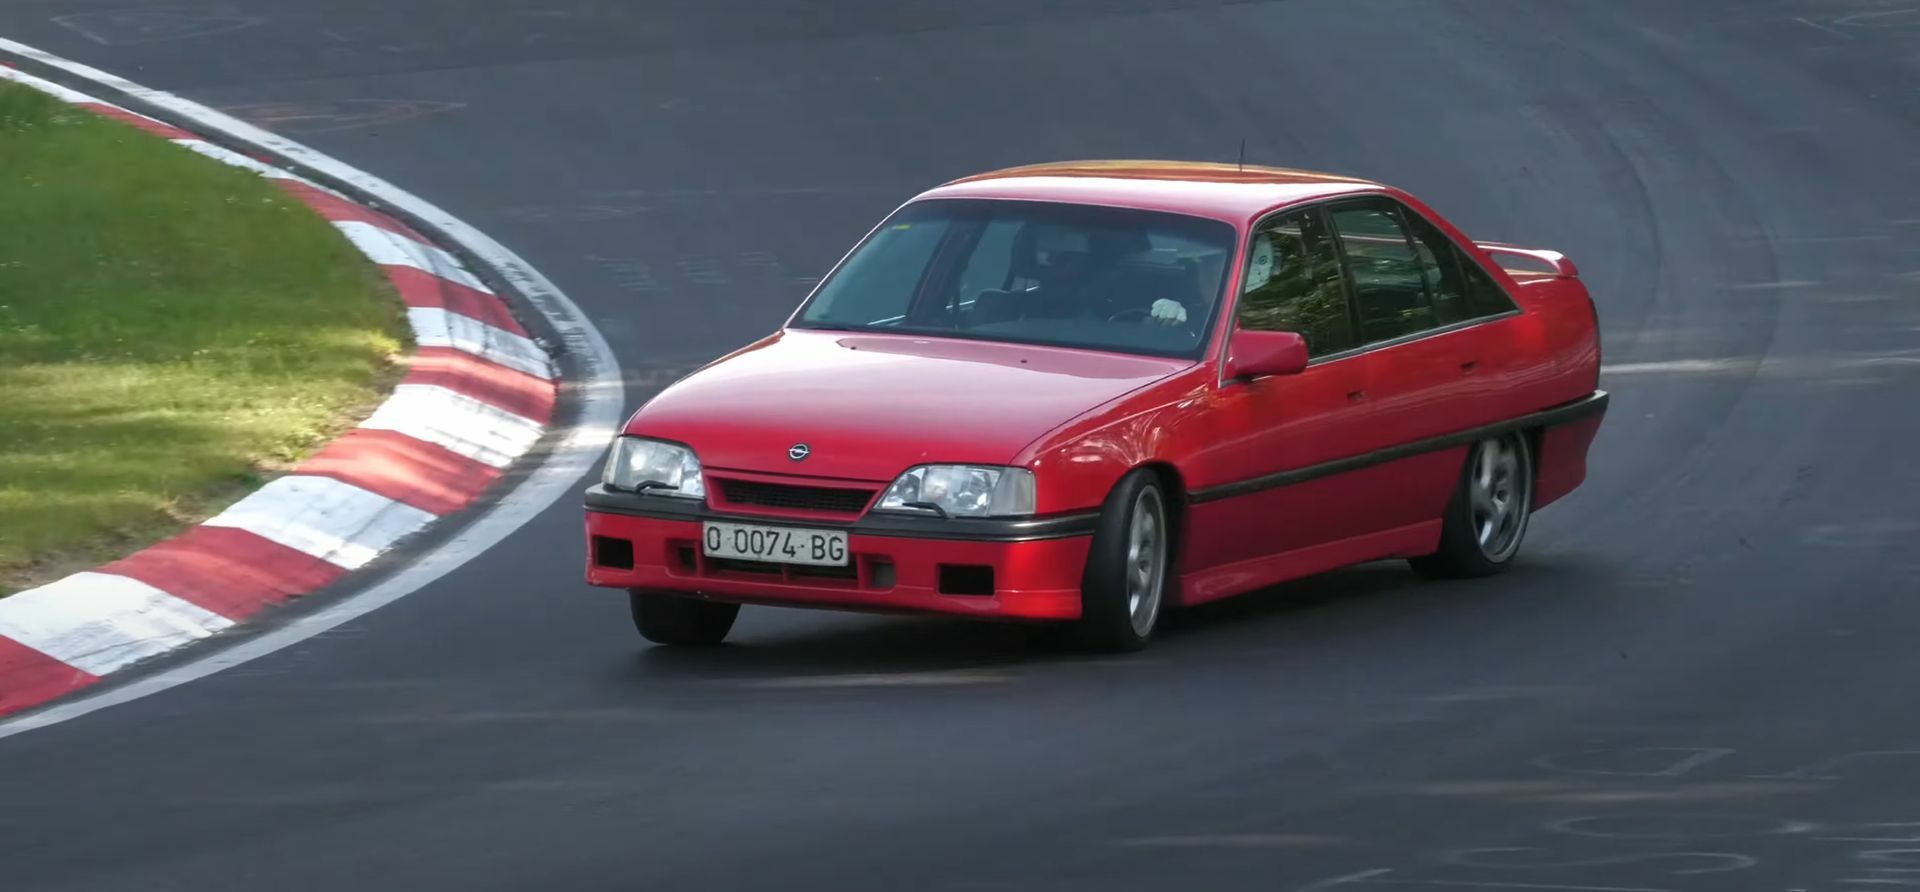 Driving a slow car fast is more fun, and this video confirms it